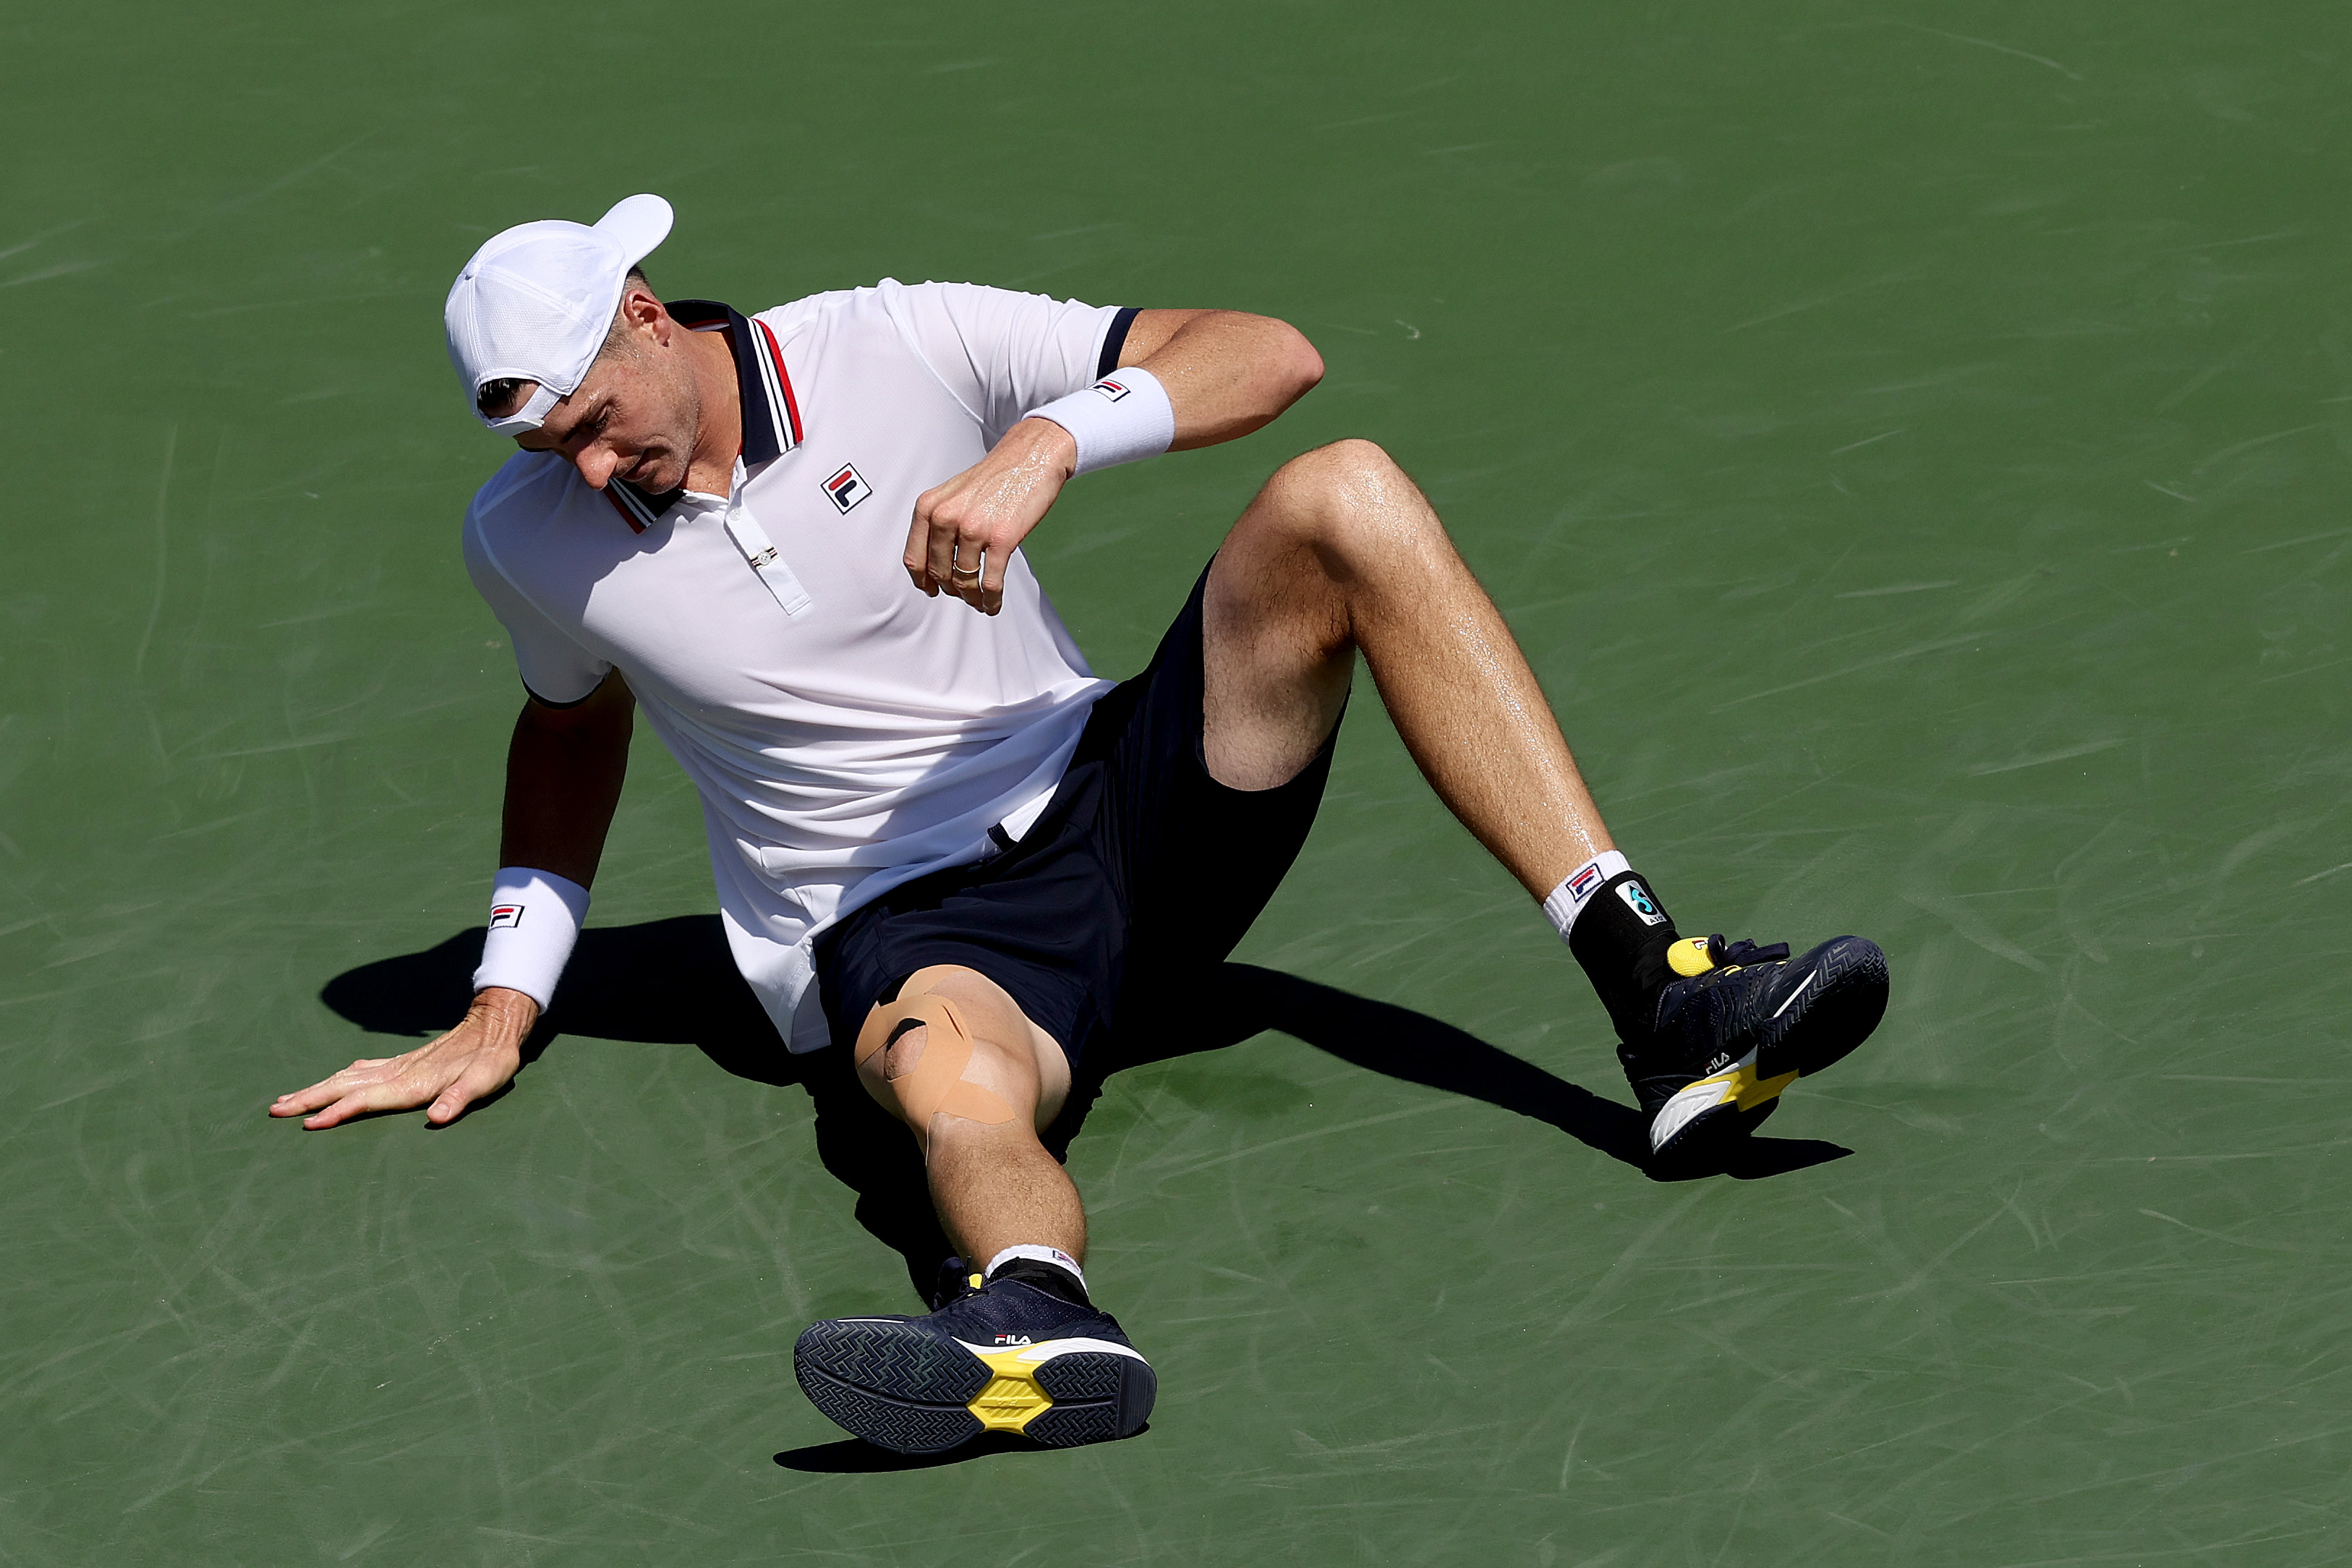 "See y'all in 2023" Fractured left wrist forces John Isner to end US